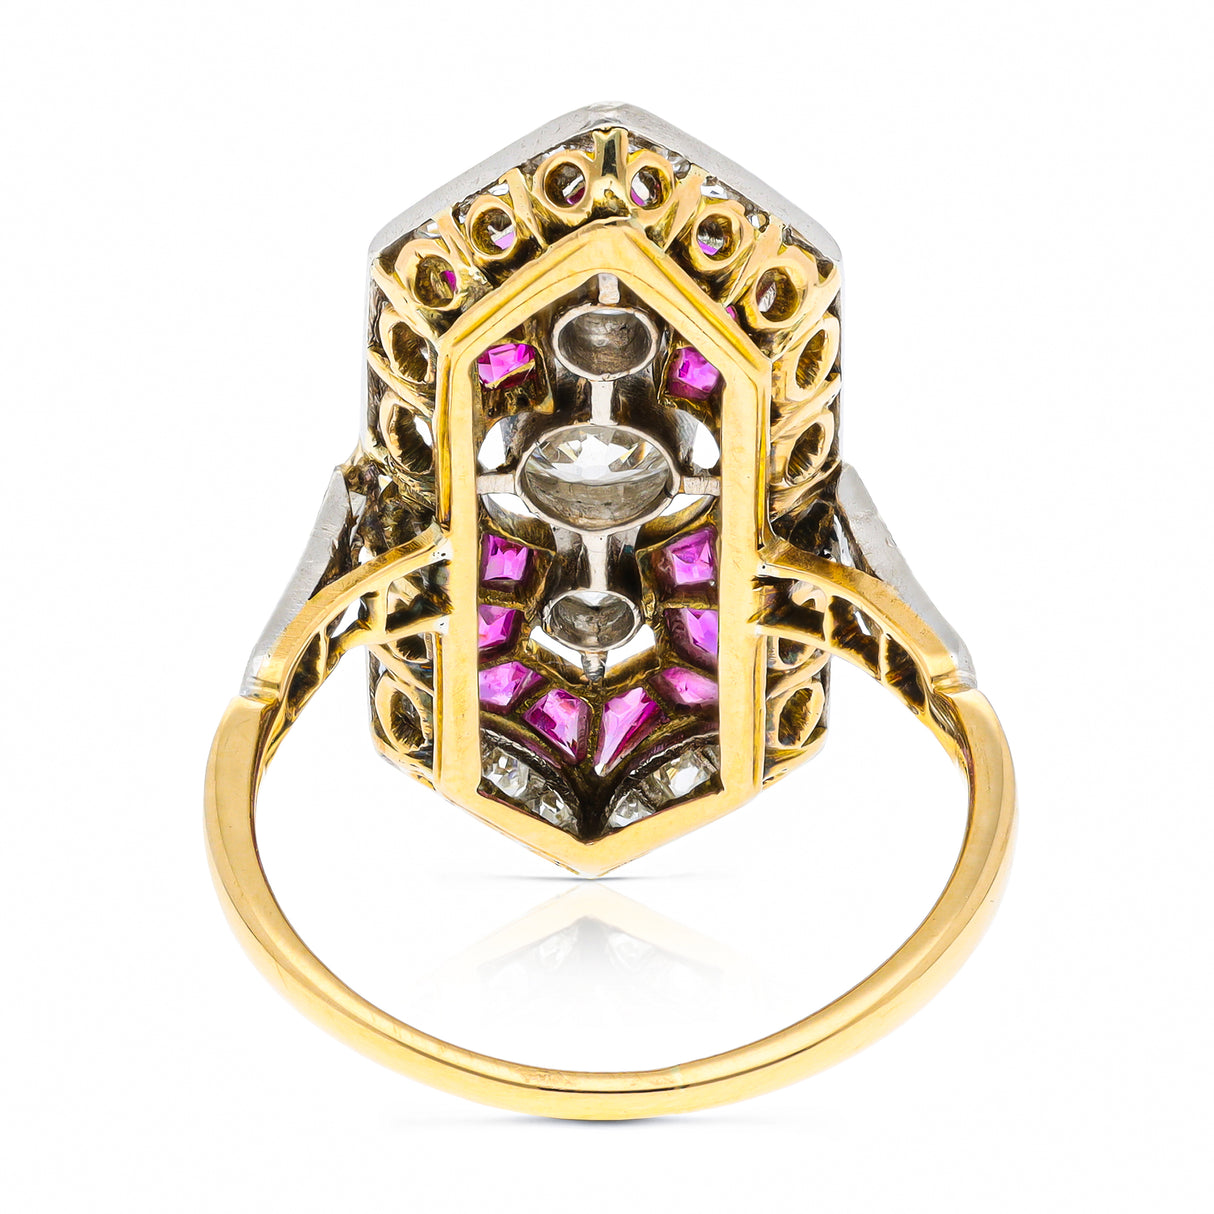 Antique ruby and diamond ring, rear view.